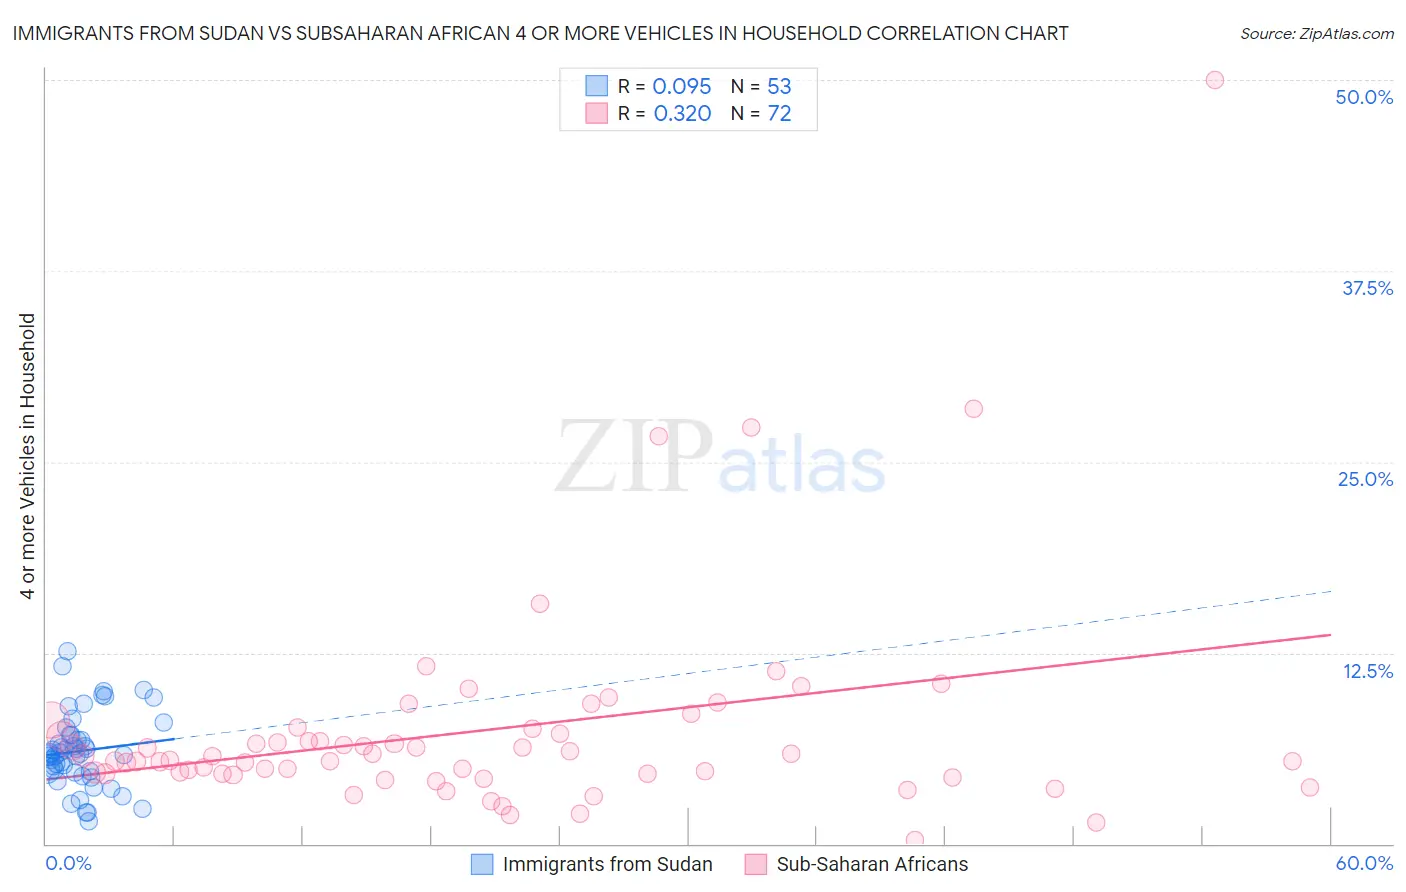 Immigrants from Sudan vs Subsaharan African 4 or more Vehicles in Household